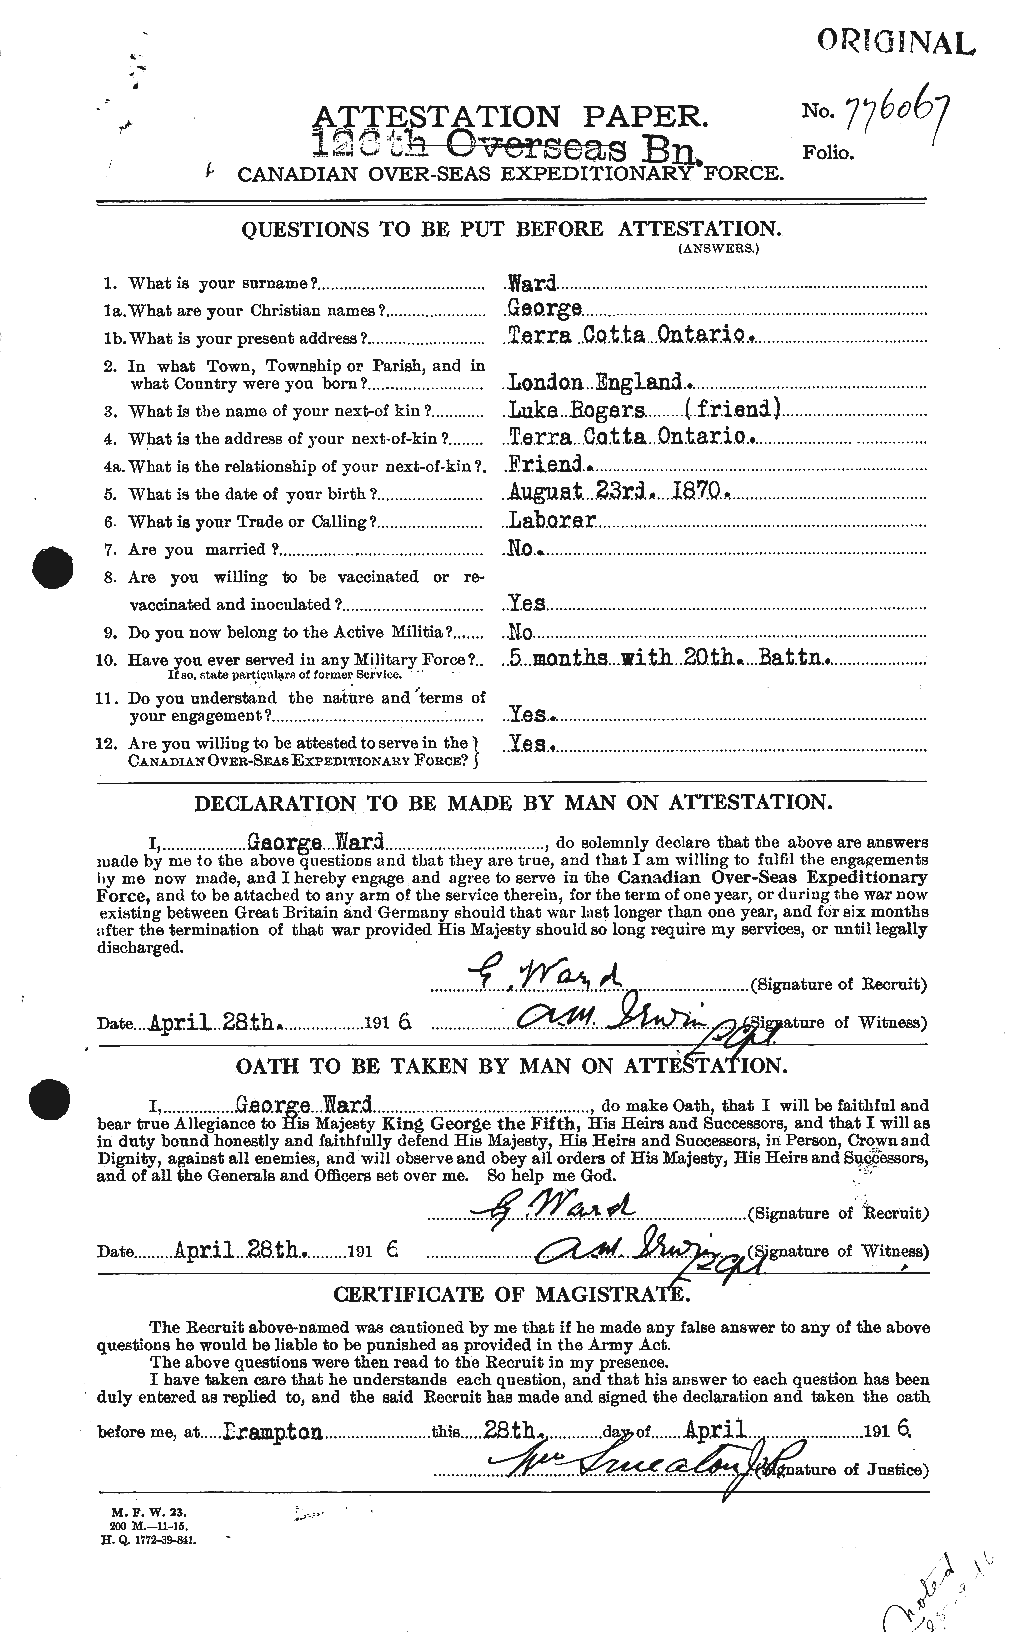 Personnel Records of the First World War - CEF 657737a